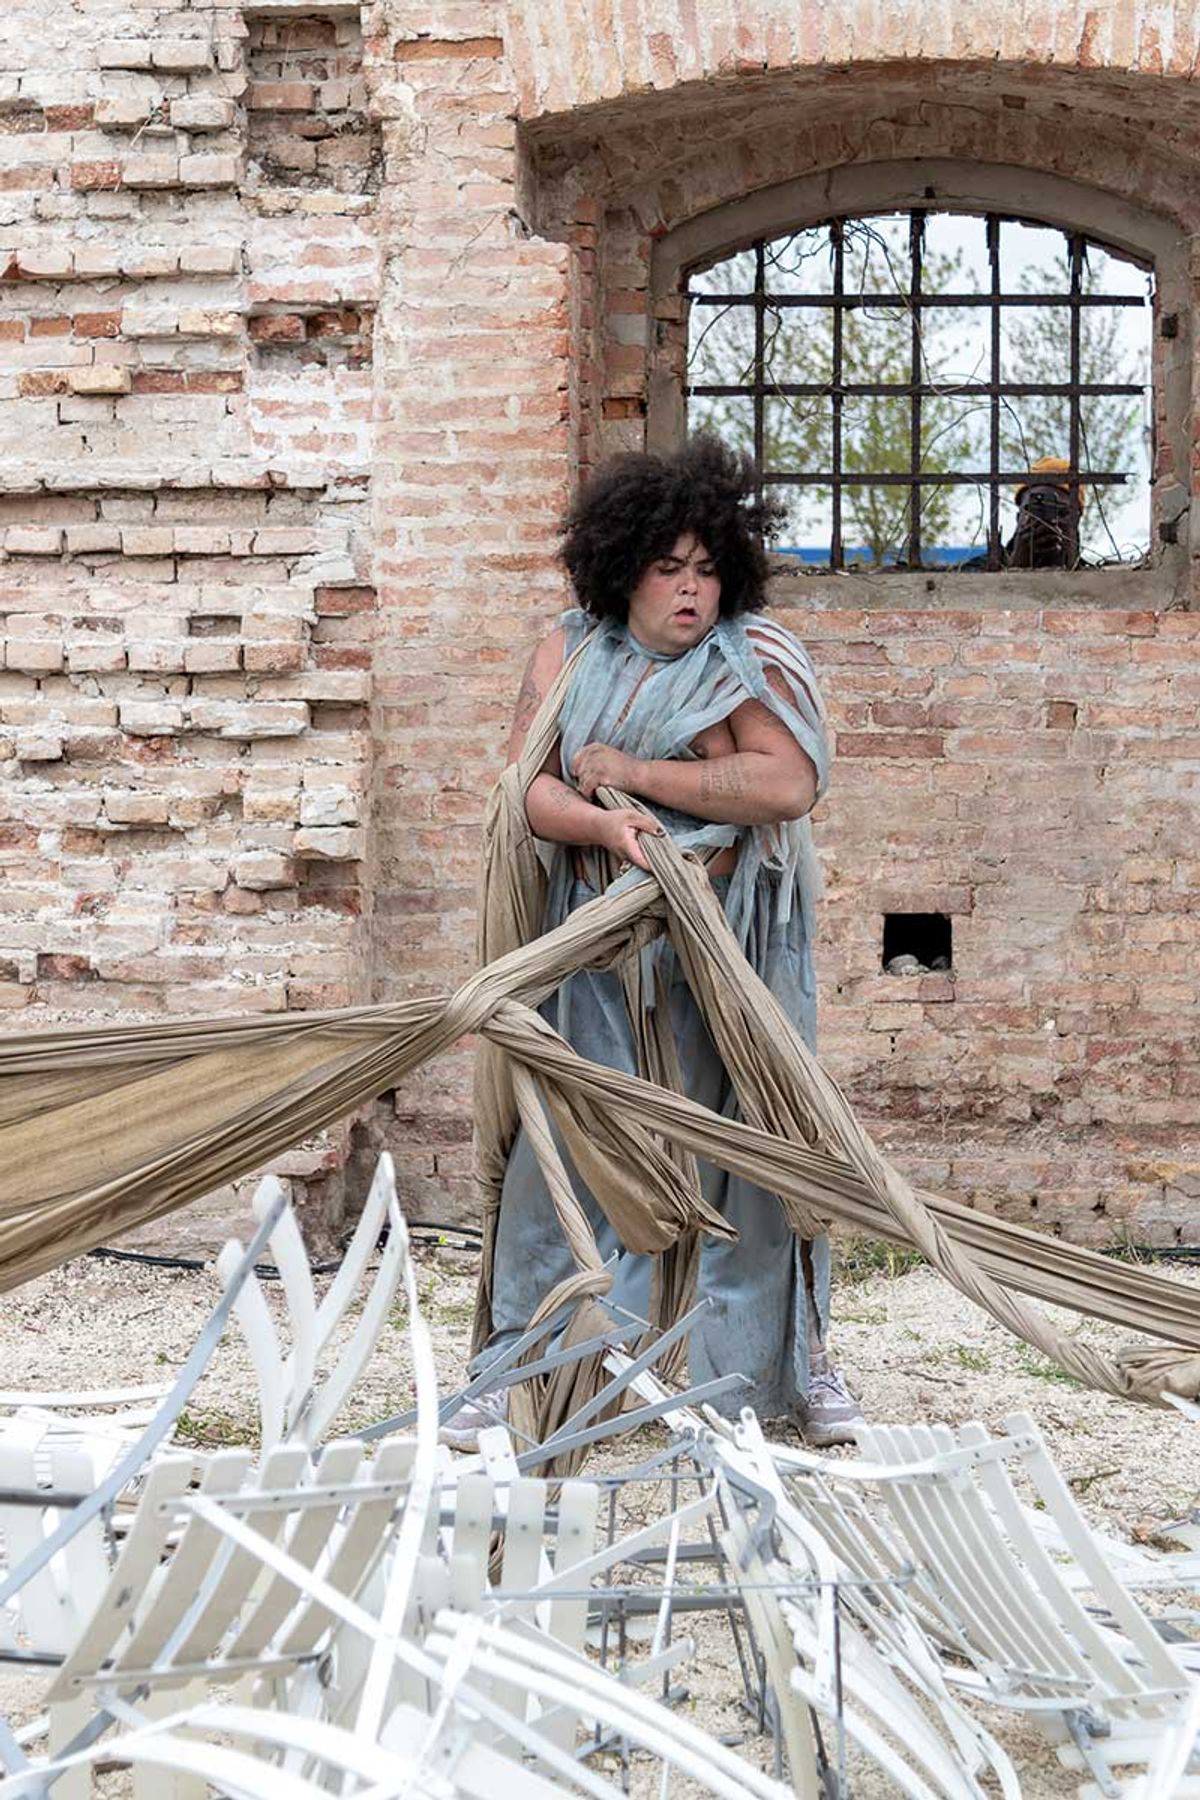 Tie me up, tie me down: the artist Jota Mombaça in her performance piece in the tired watering at San Giacomo di Paludo during the 2022 Biennale

Photo: Irene Fanizza